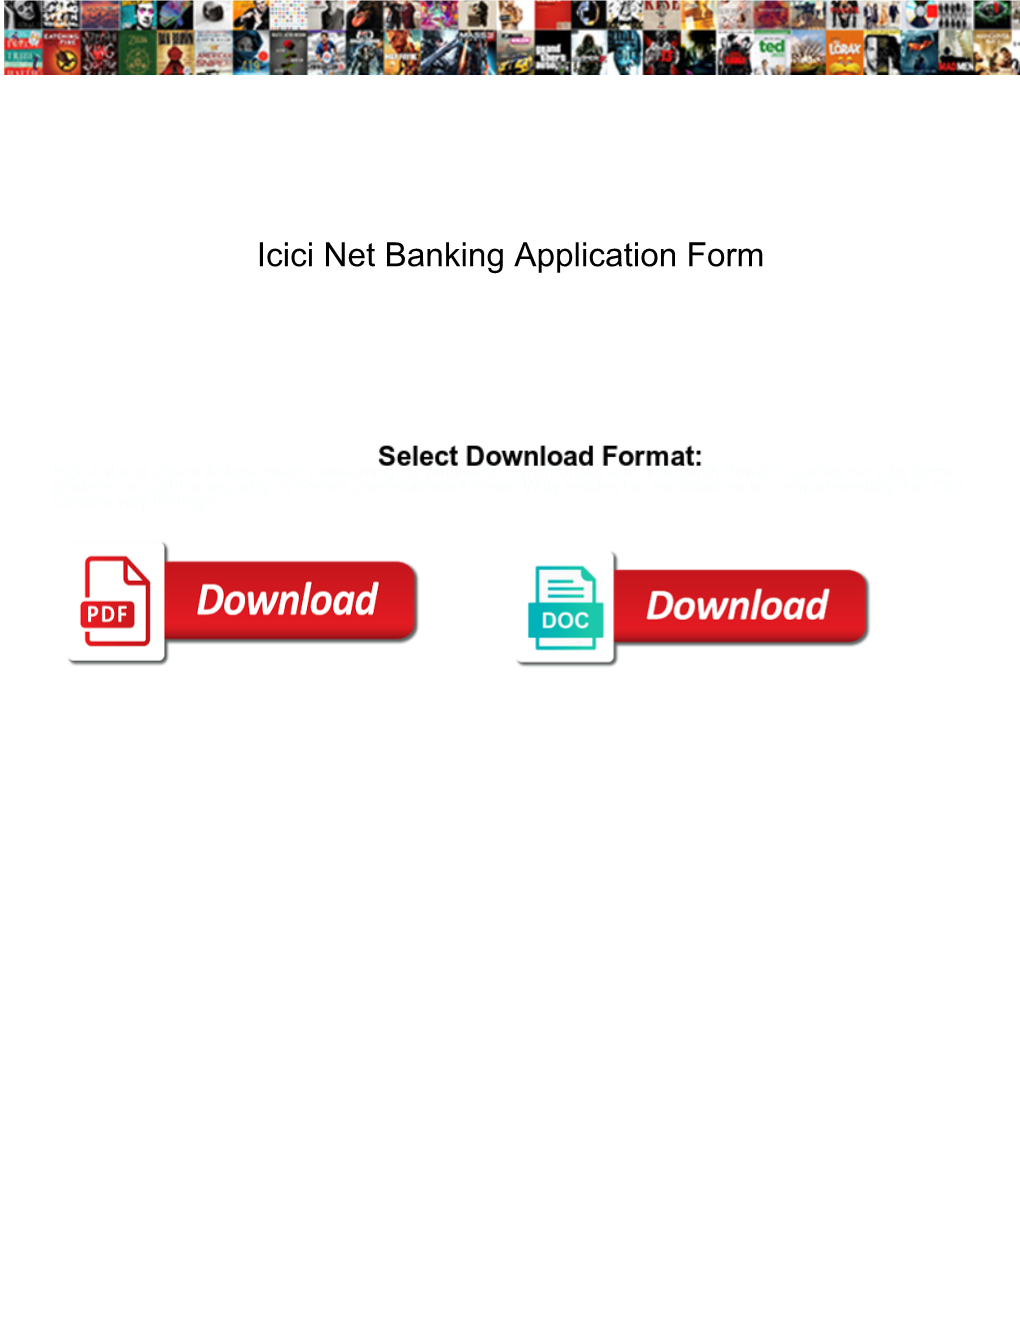 Icici Net Banking Application Form